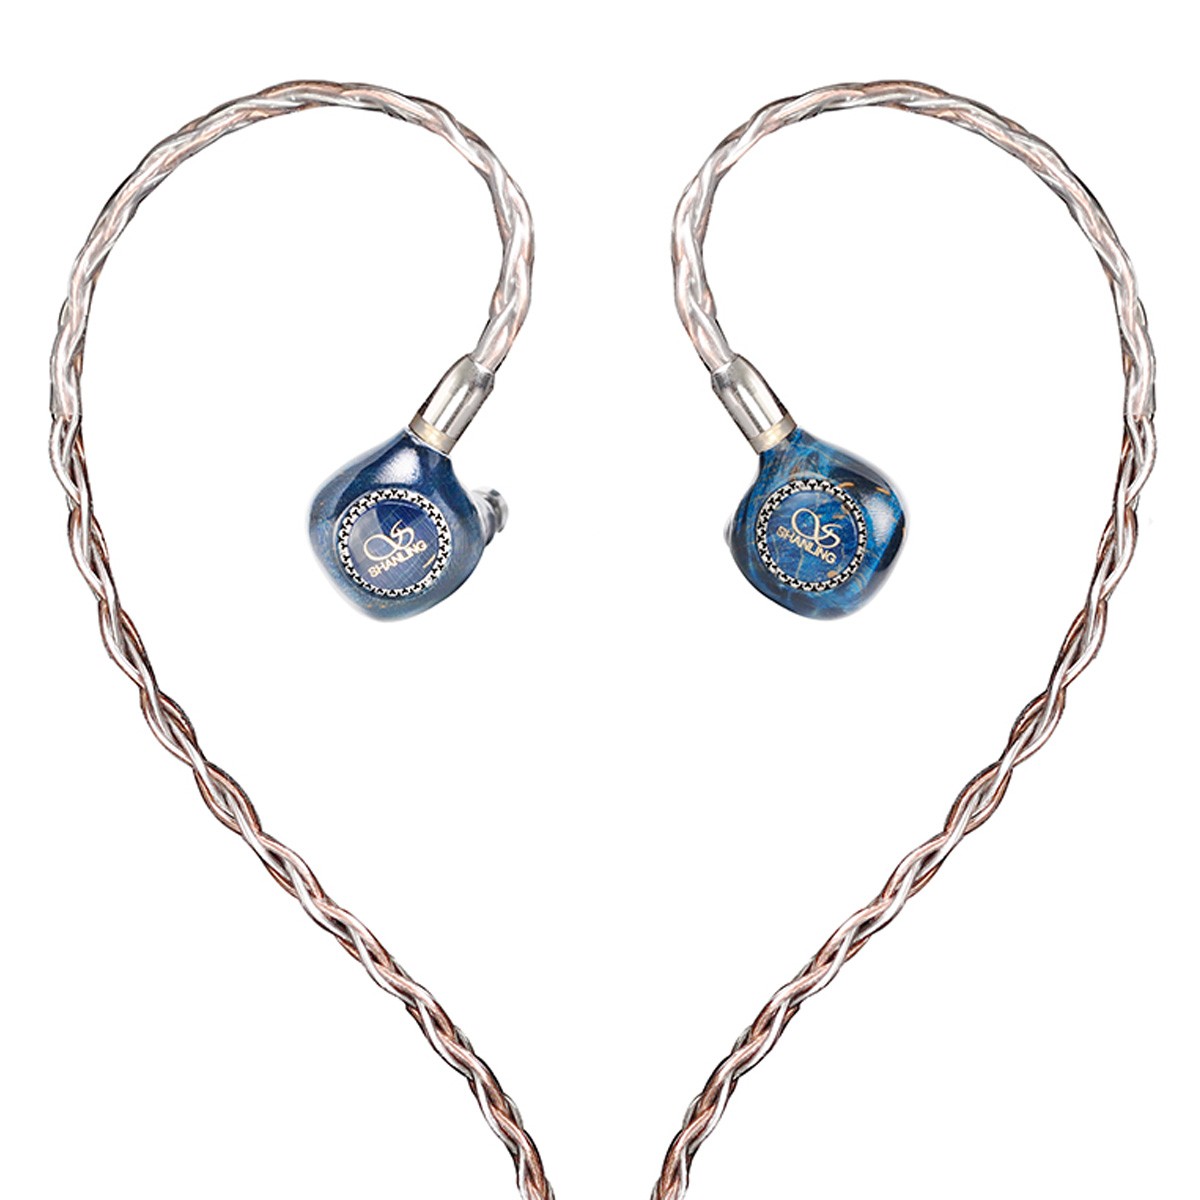 Shanling MG600 In-Ear Monitors (Blue) (Call/Email For Availability)